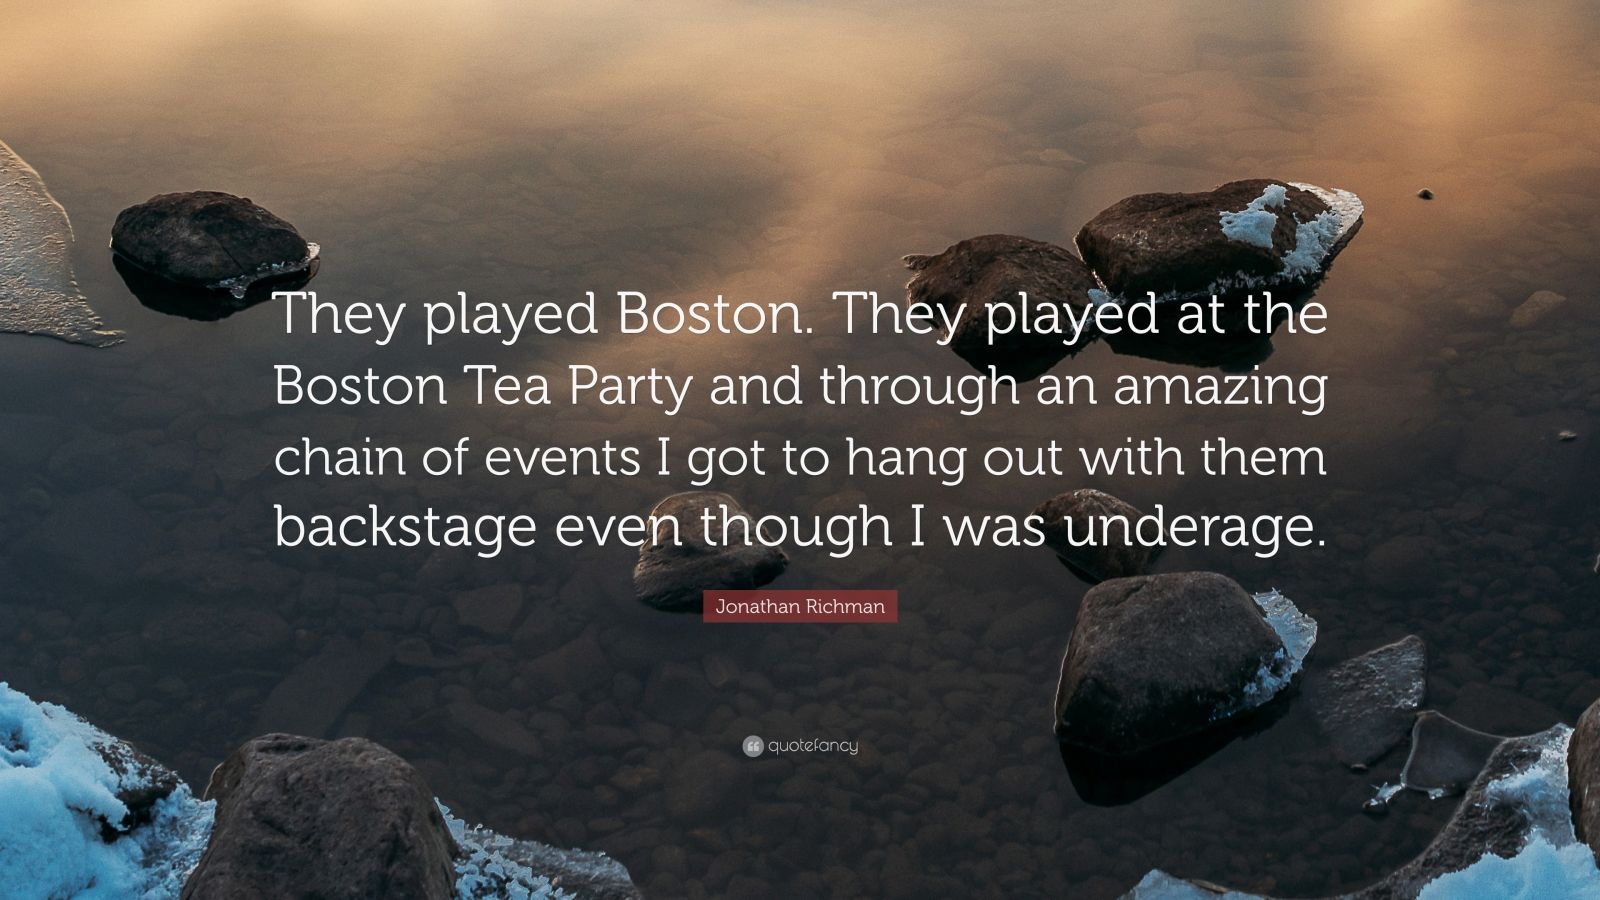 Jonathan Richman Quote “They played Boston. They played at the Boston